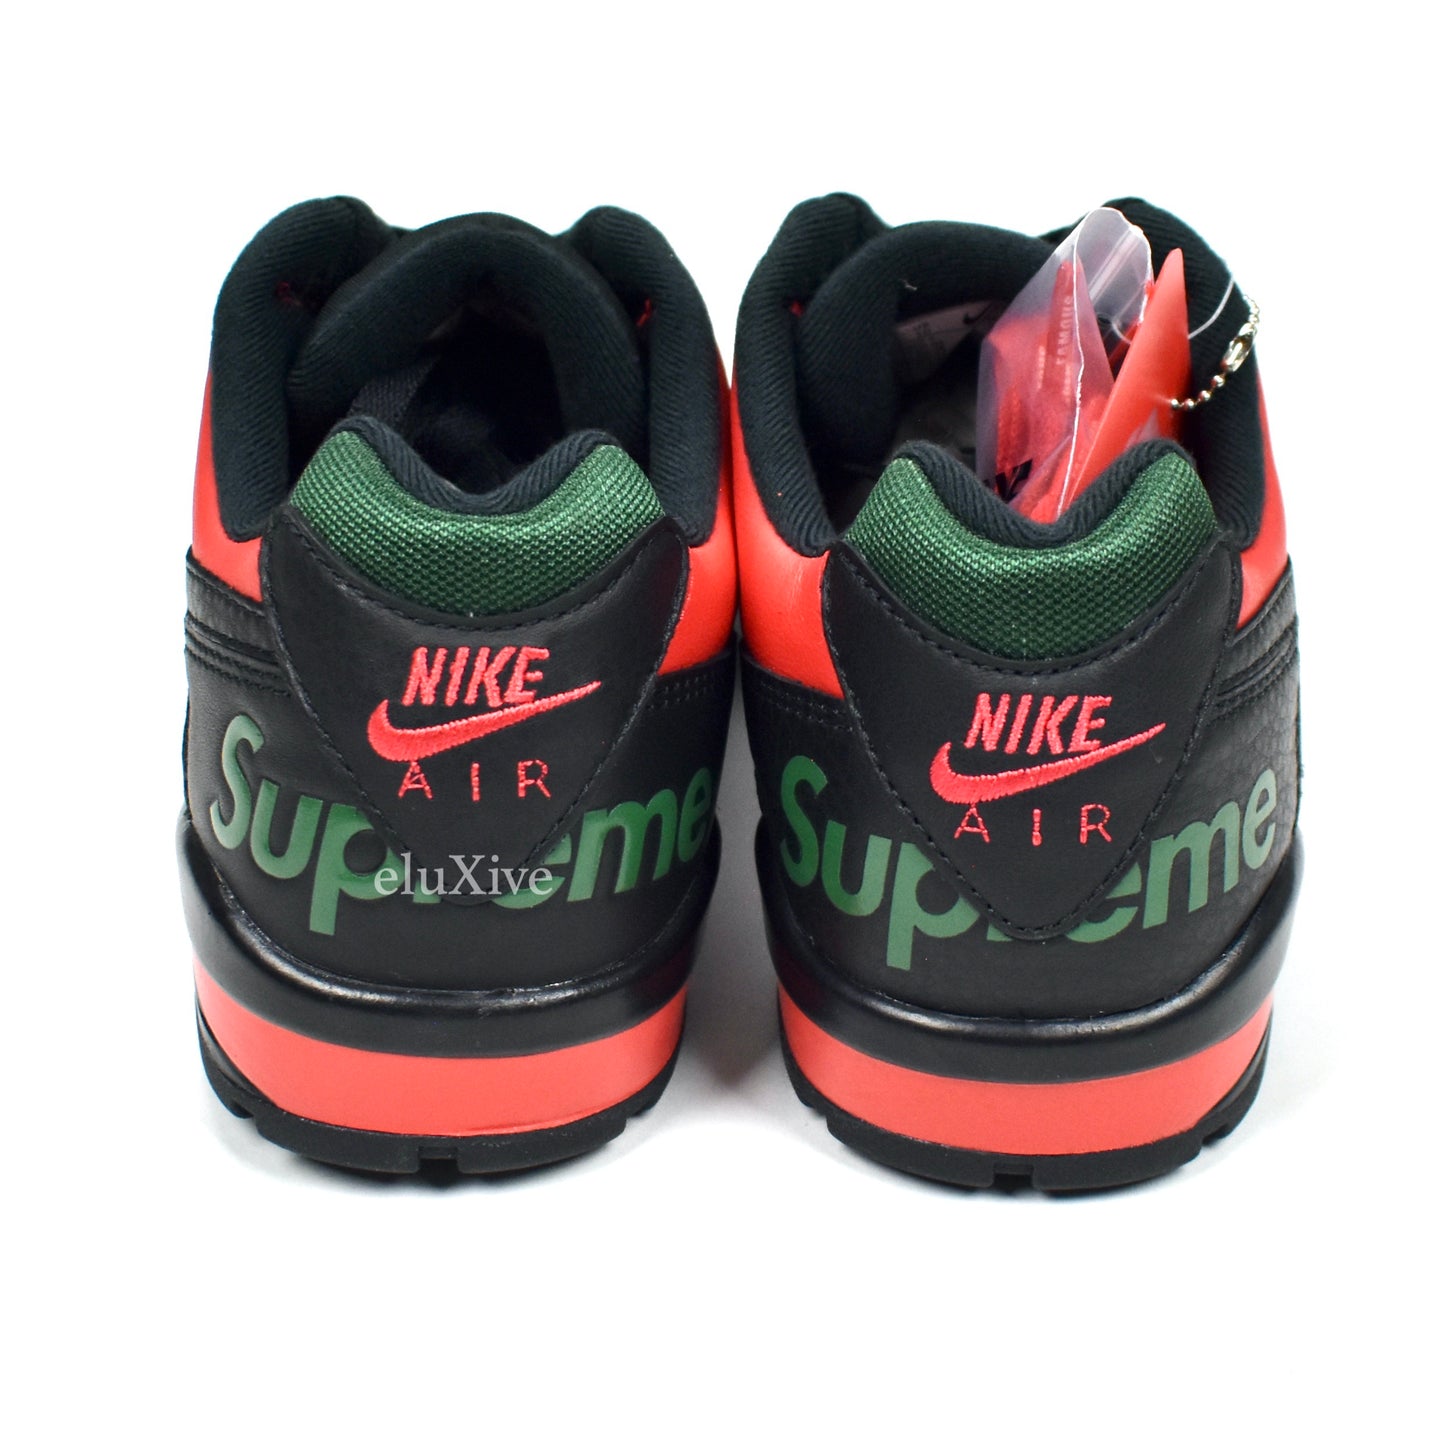 Supreme x Nike - Air Cross Trainer 3 Low 'Gucci' (Black/Red/Green)